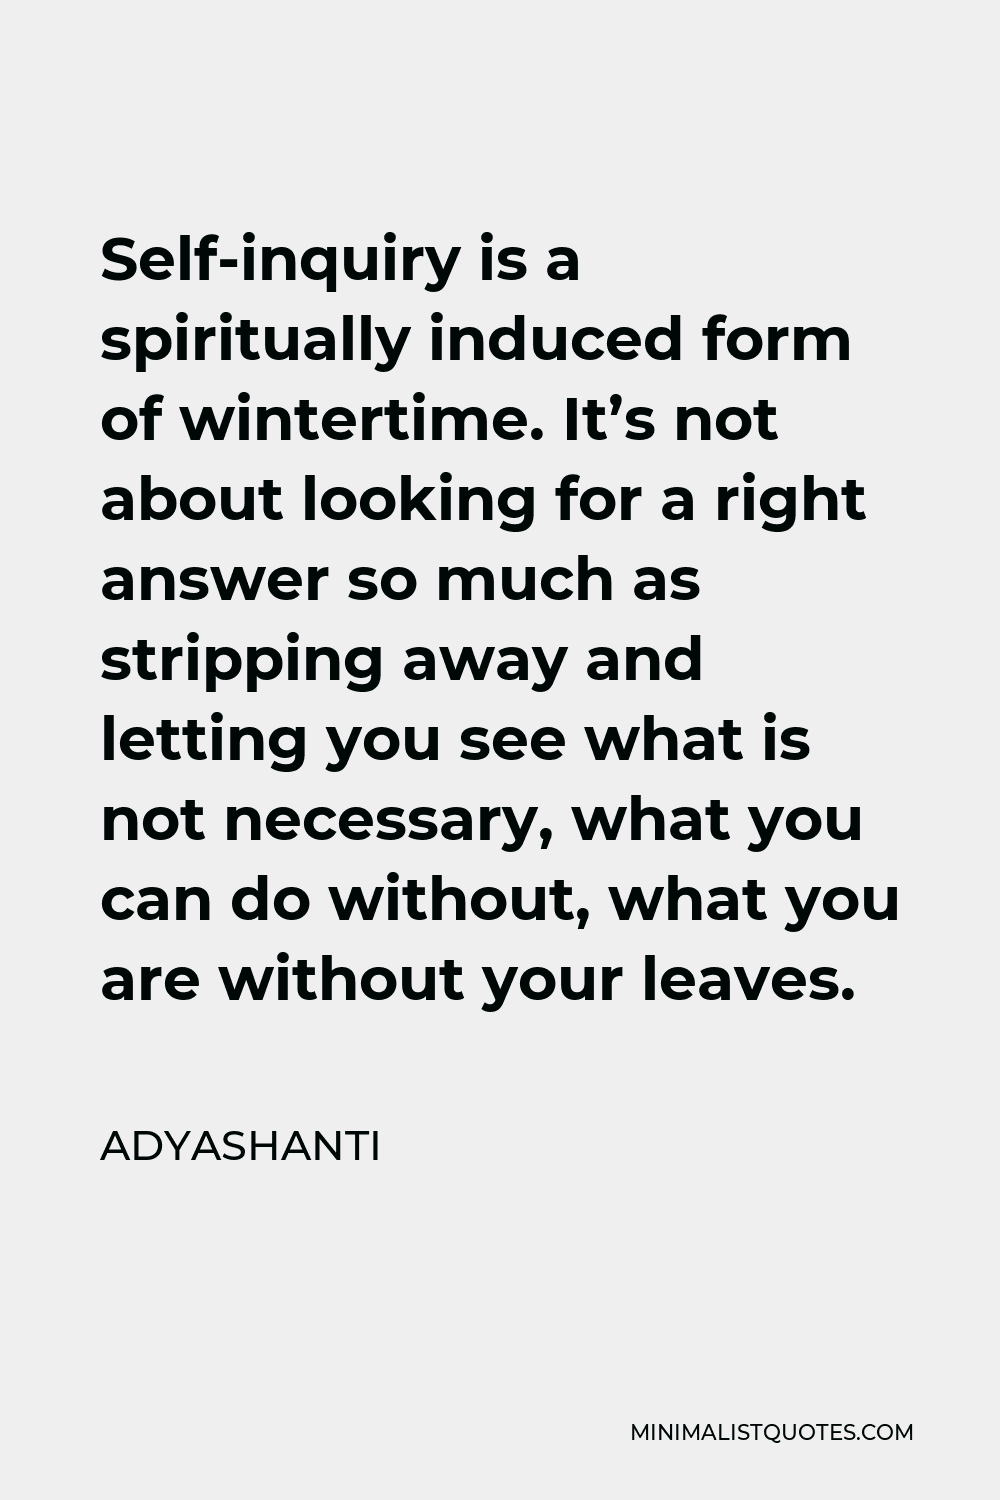 Adyashanti Quote - Self-inquiry is a spiritually induced form of wintertime. It’s not about looking for a right answer so much as stripping away and letting you see what is not necessary, what you can do without, what you are without your leaves.